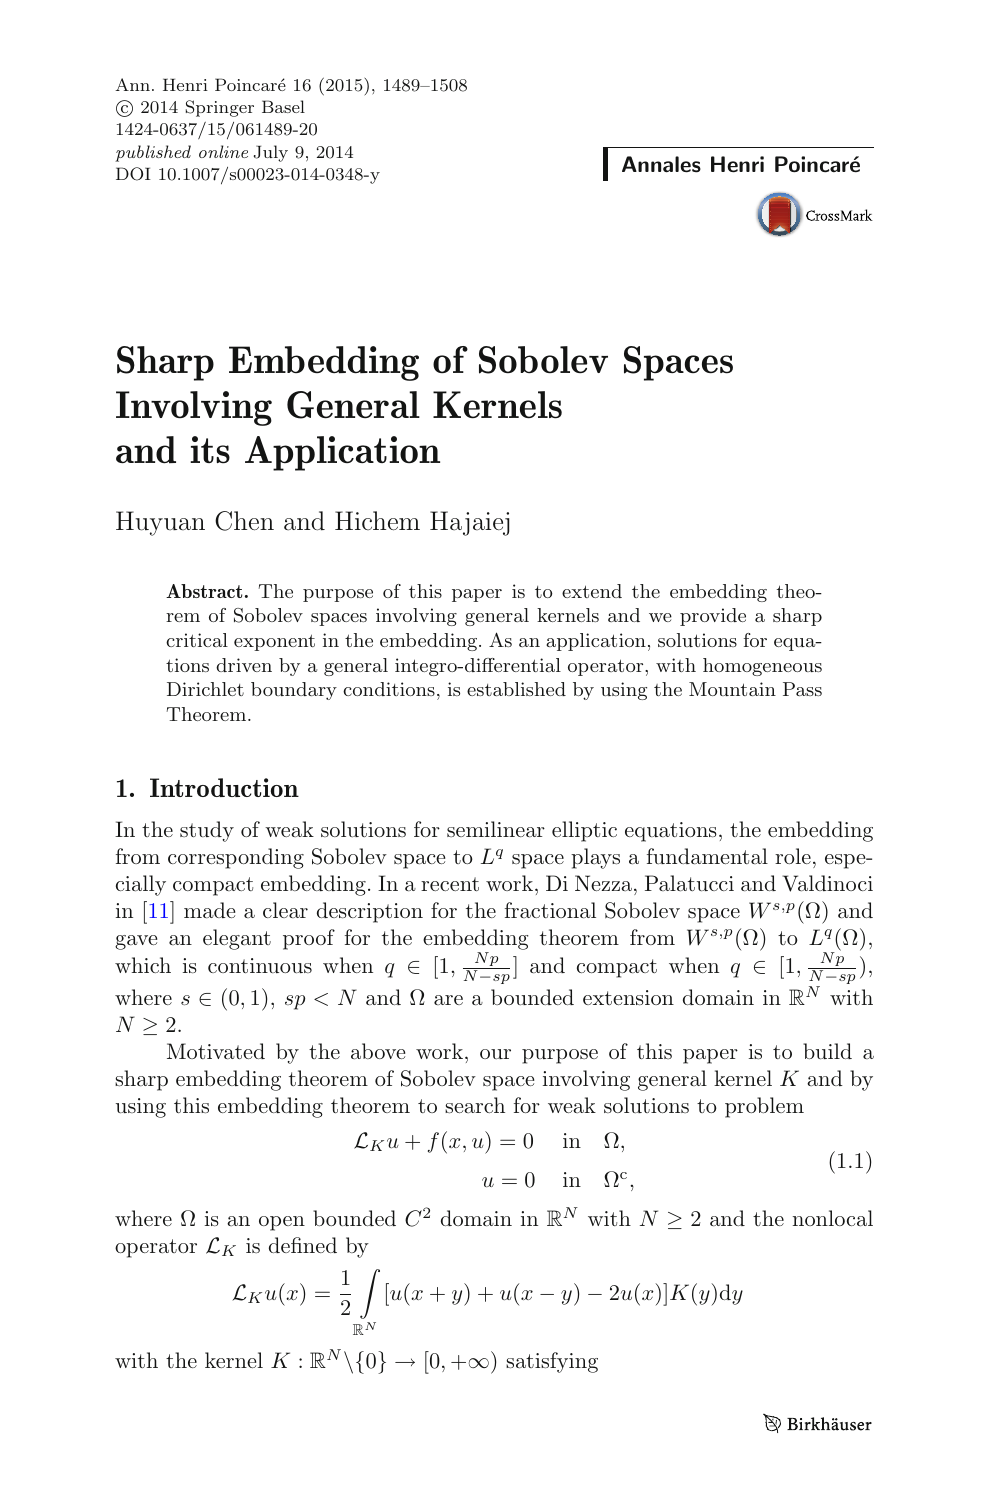 Sharp Embedding Of Sobolev Spaces Involving General Kernels And Its Application Topic Of Research Paper In Mathematics Download Scholarly Article Pdf And Read For Free On Cyberleninka Open Science Hub